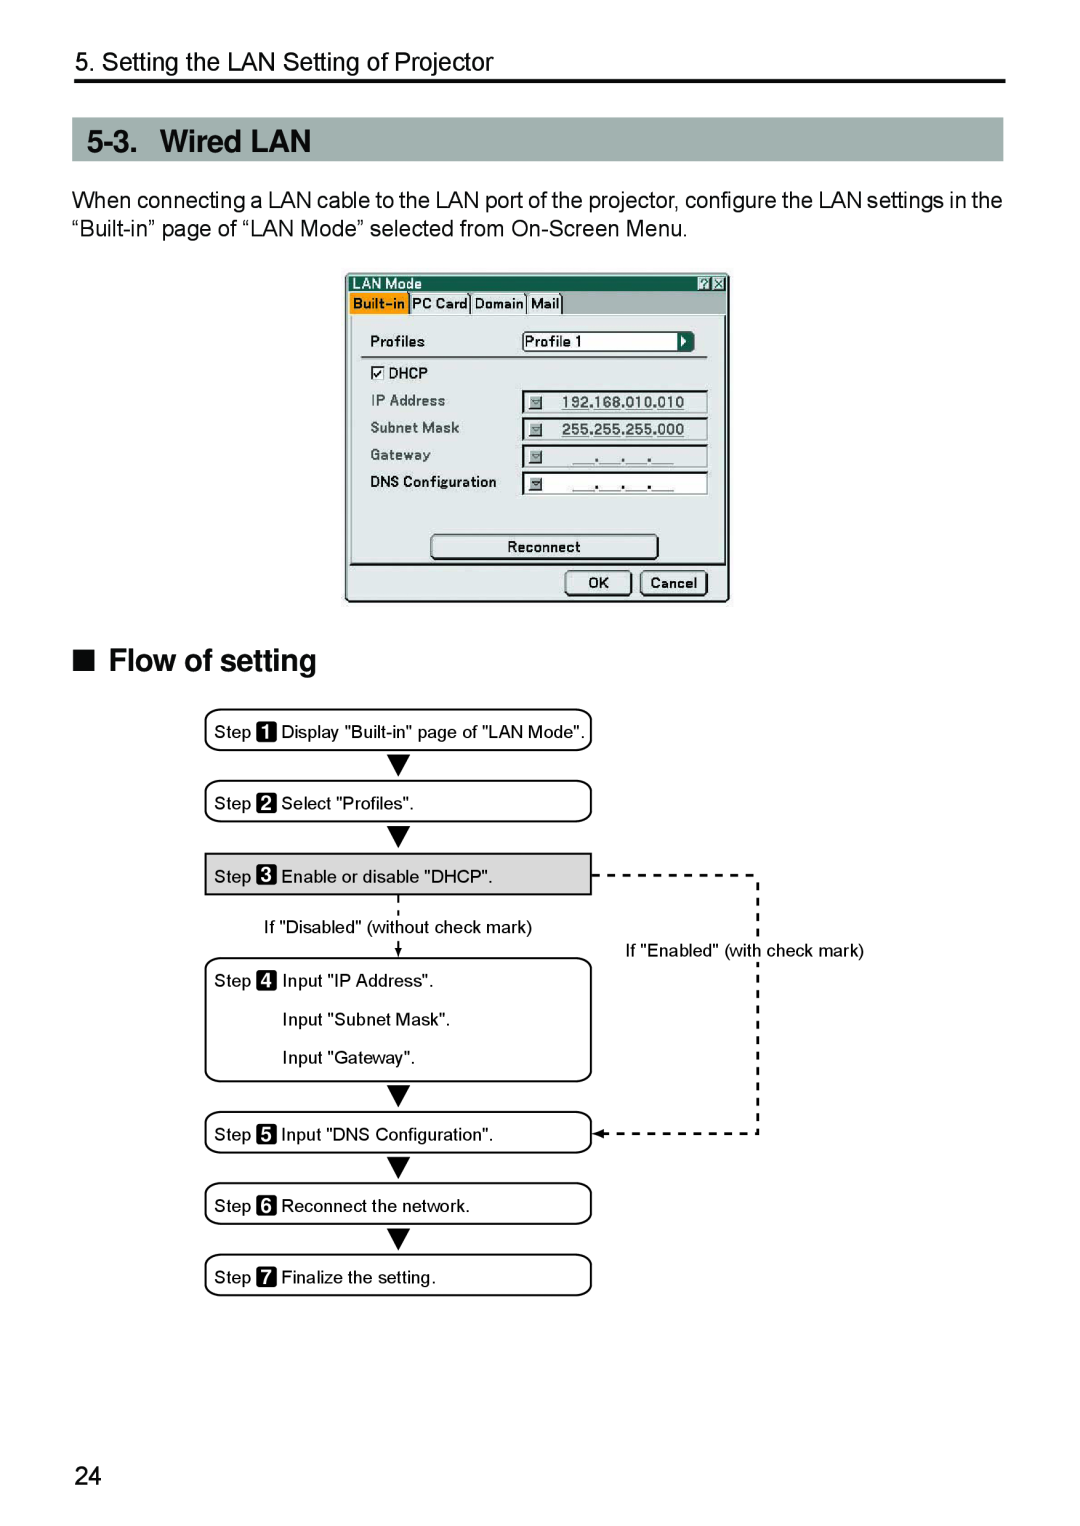 Dukane 8808 user manual Wired LAN, Flow of setting, Setting the LAN Setting of Projector 